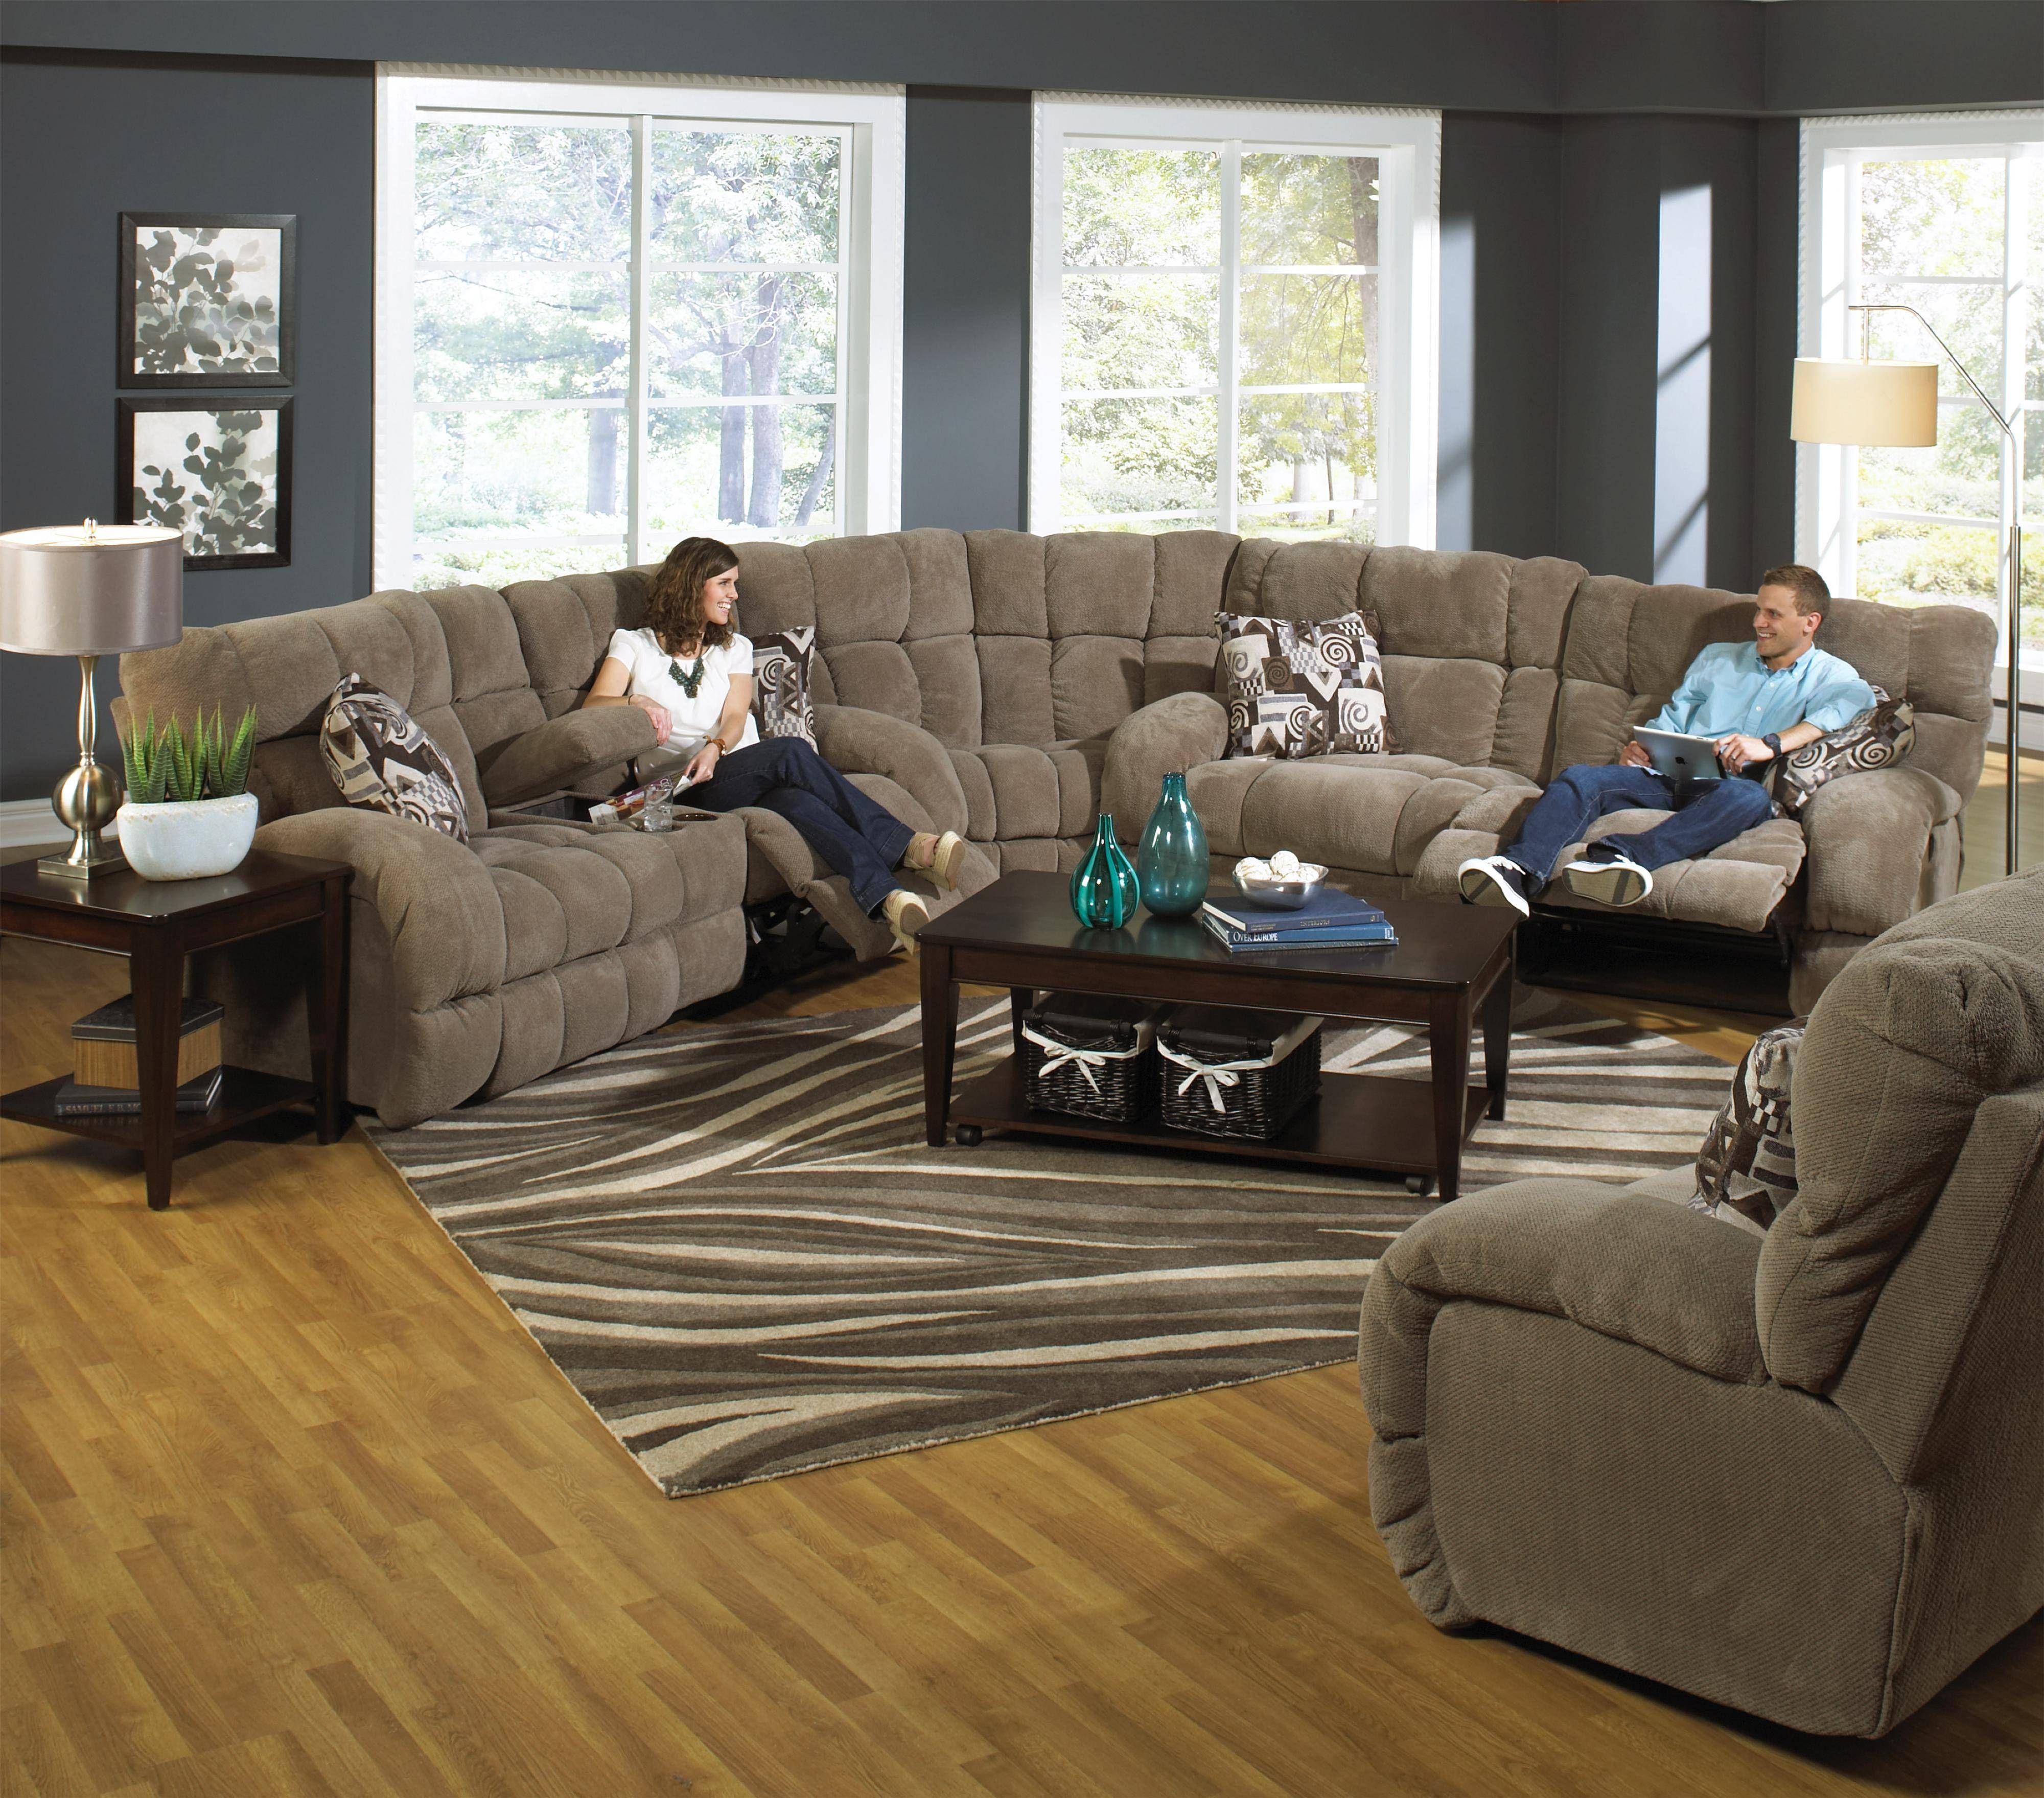 Furniture Lazy Boy Sectional Sectional Couches With Recliners Inside Sectional Sofas With Electric Recliners 